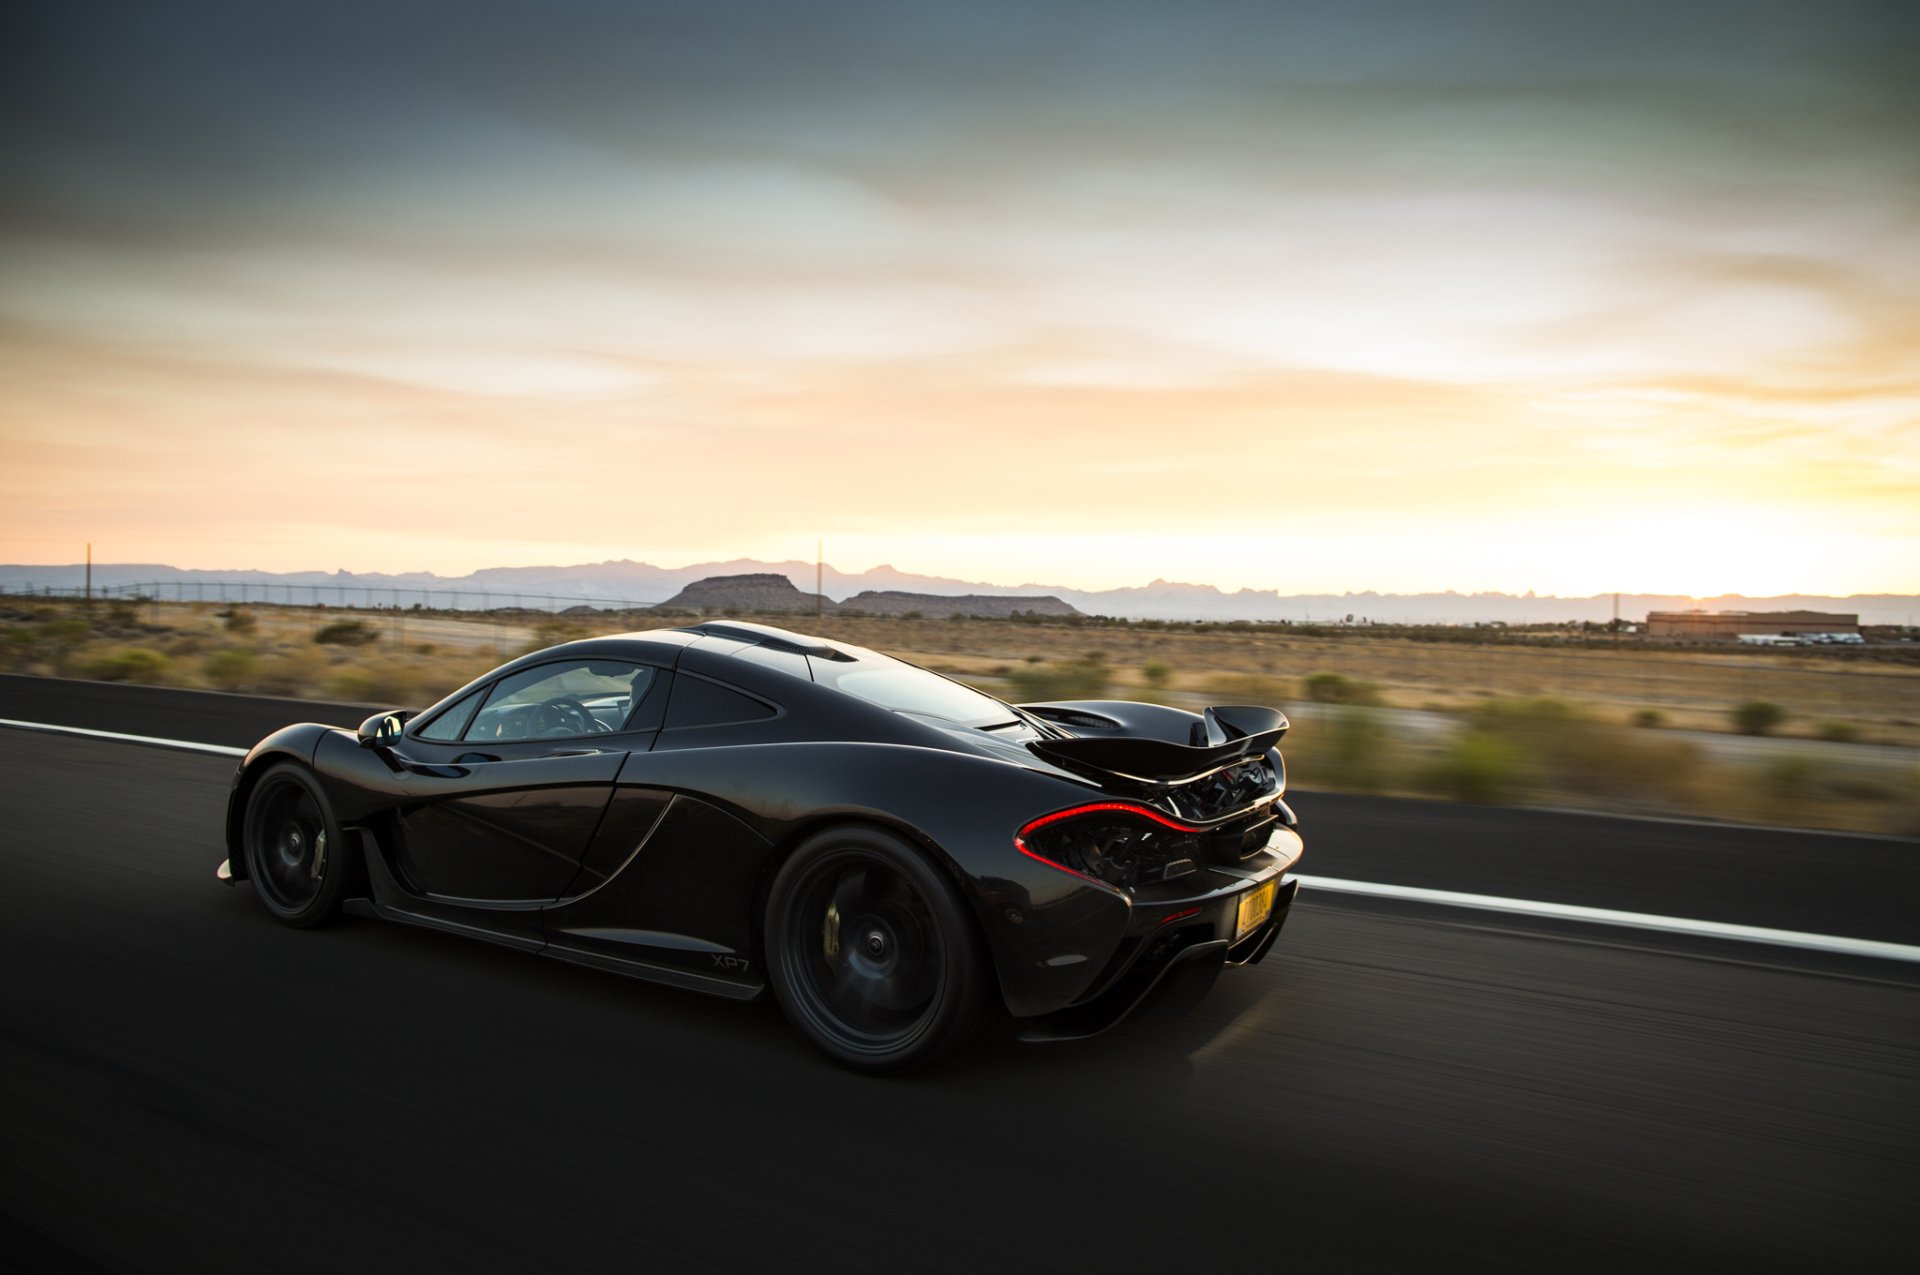 McLaren P1 Full HD Wallpaper and Background Image | 2048x1360 | ID:541182